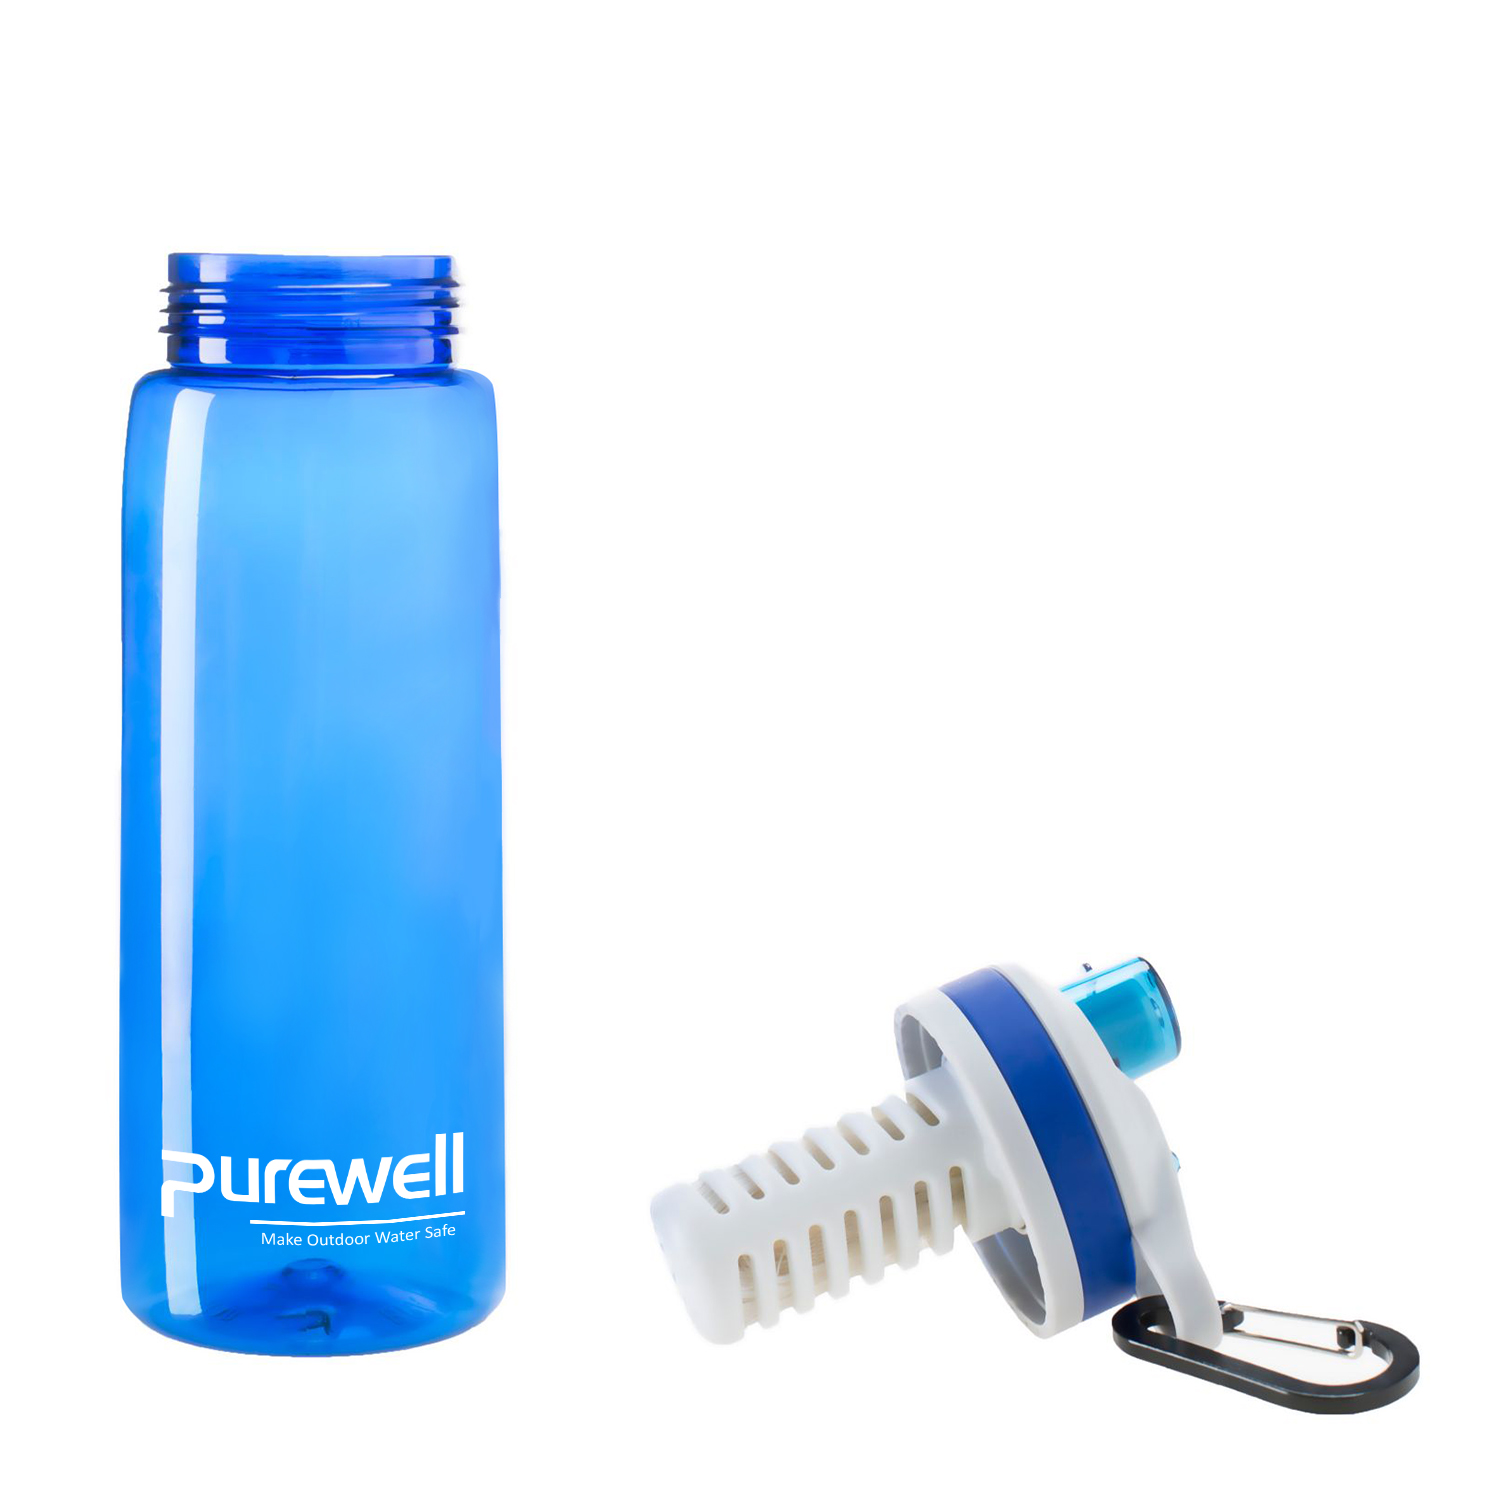 Purewell Array image521